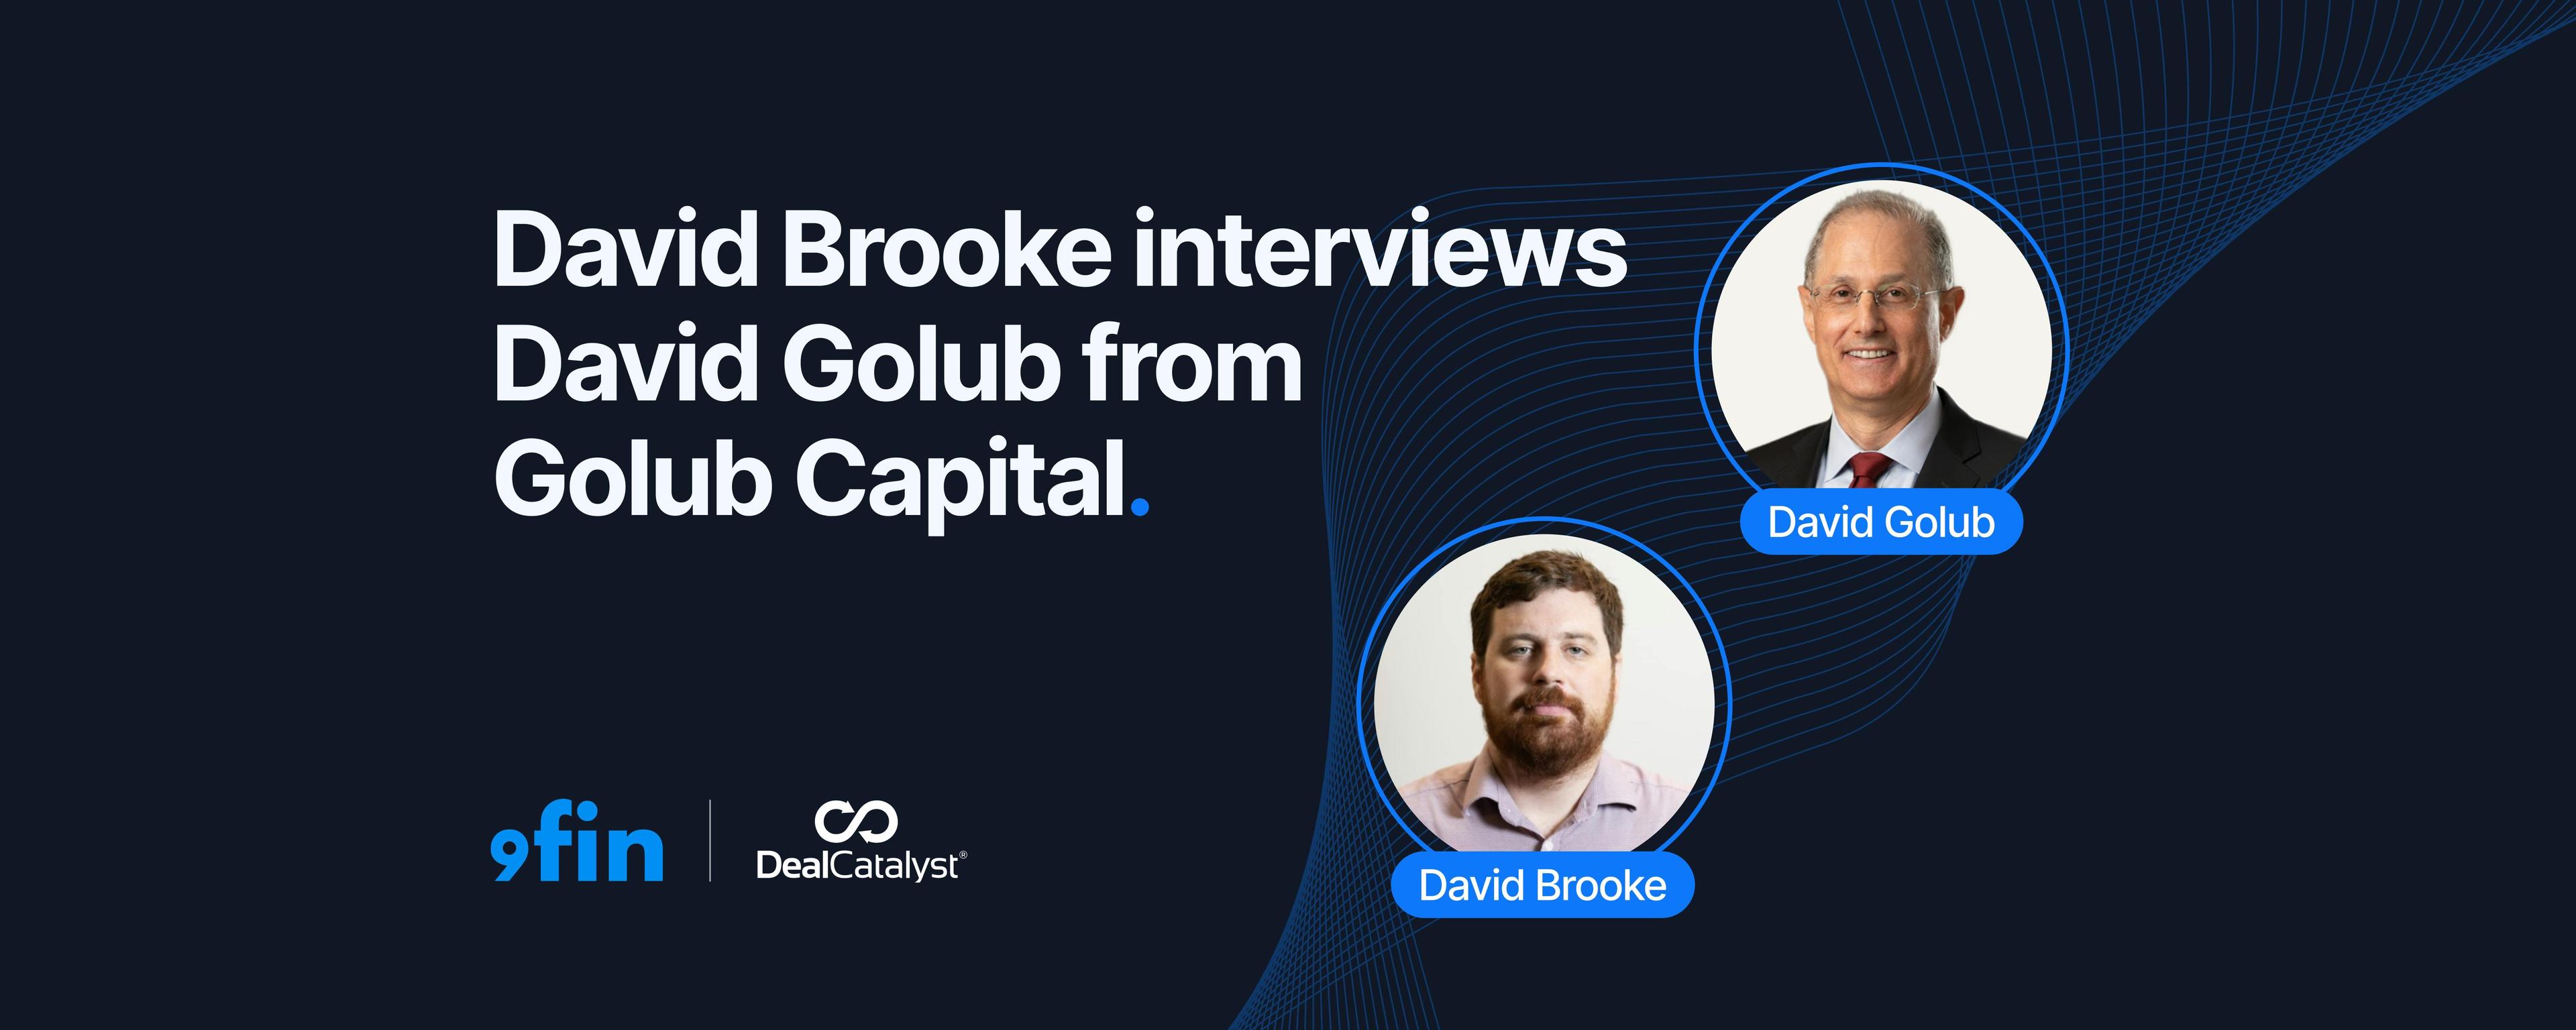 Video interview — David Golub, Golub Capital — Don’t exclude BSL from private credit’s next chapter